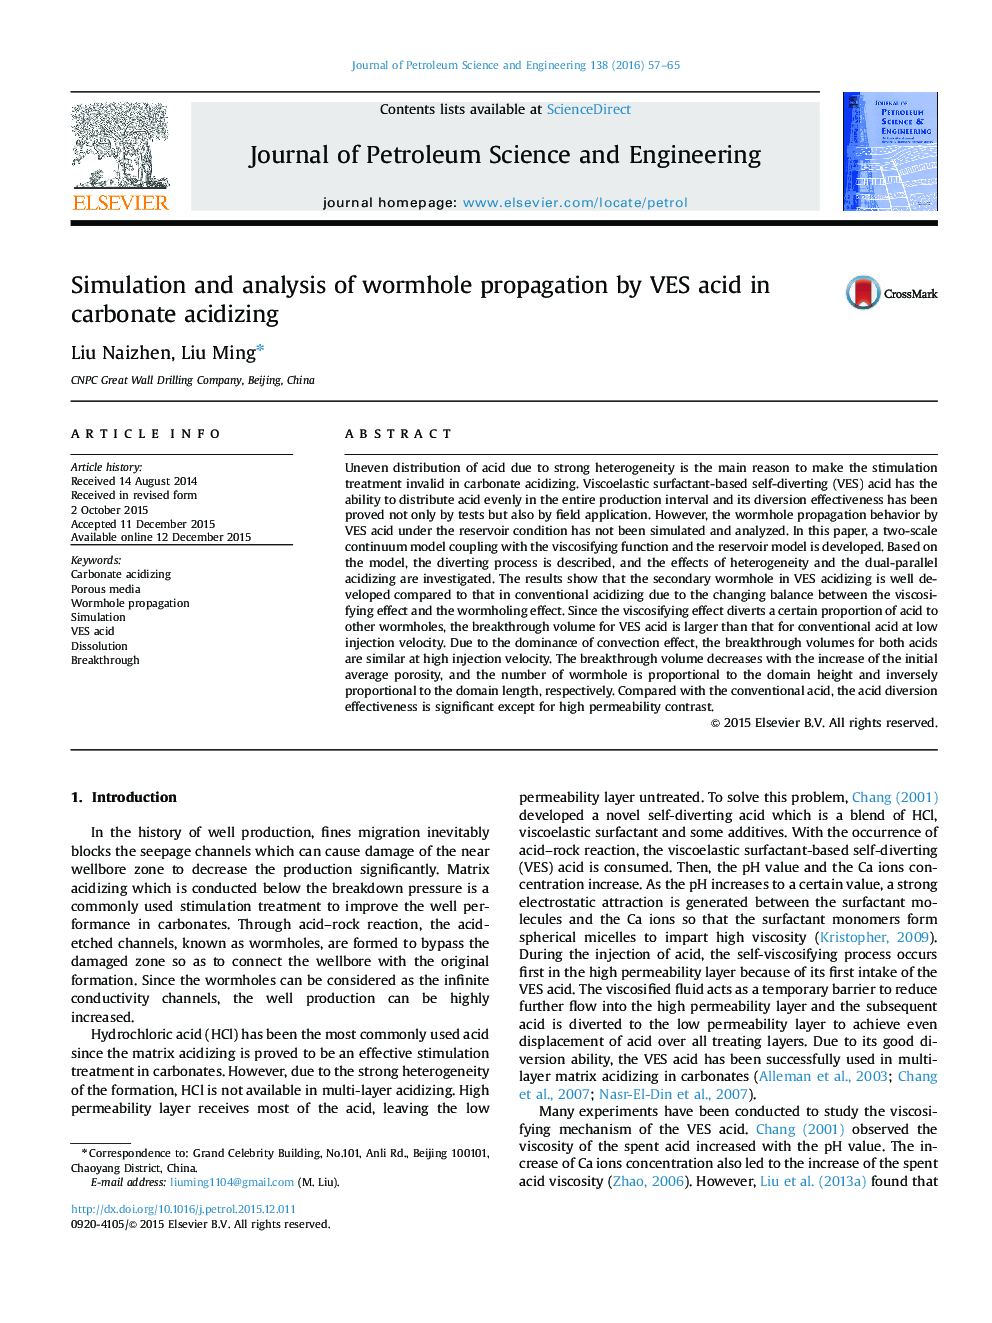 Simulation and analysis of wormhole propagation by VES acid in carbonate acidizing